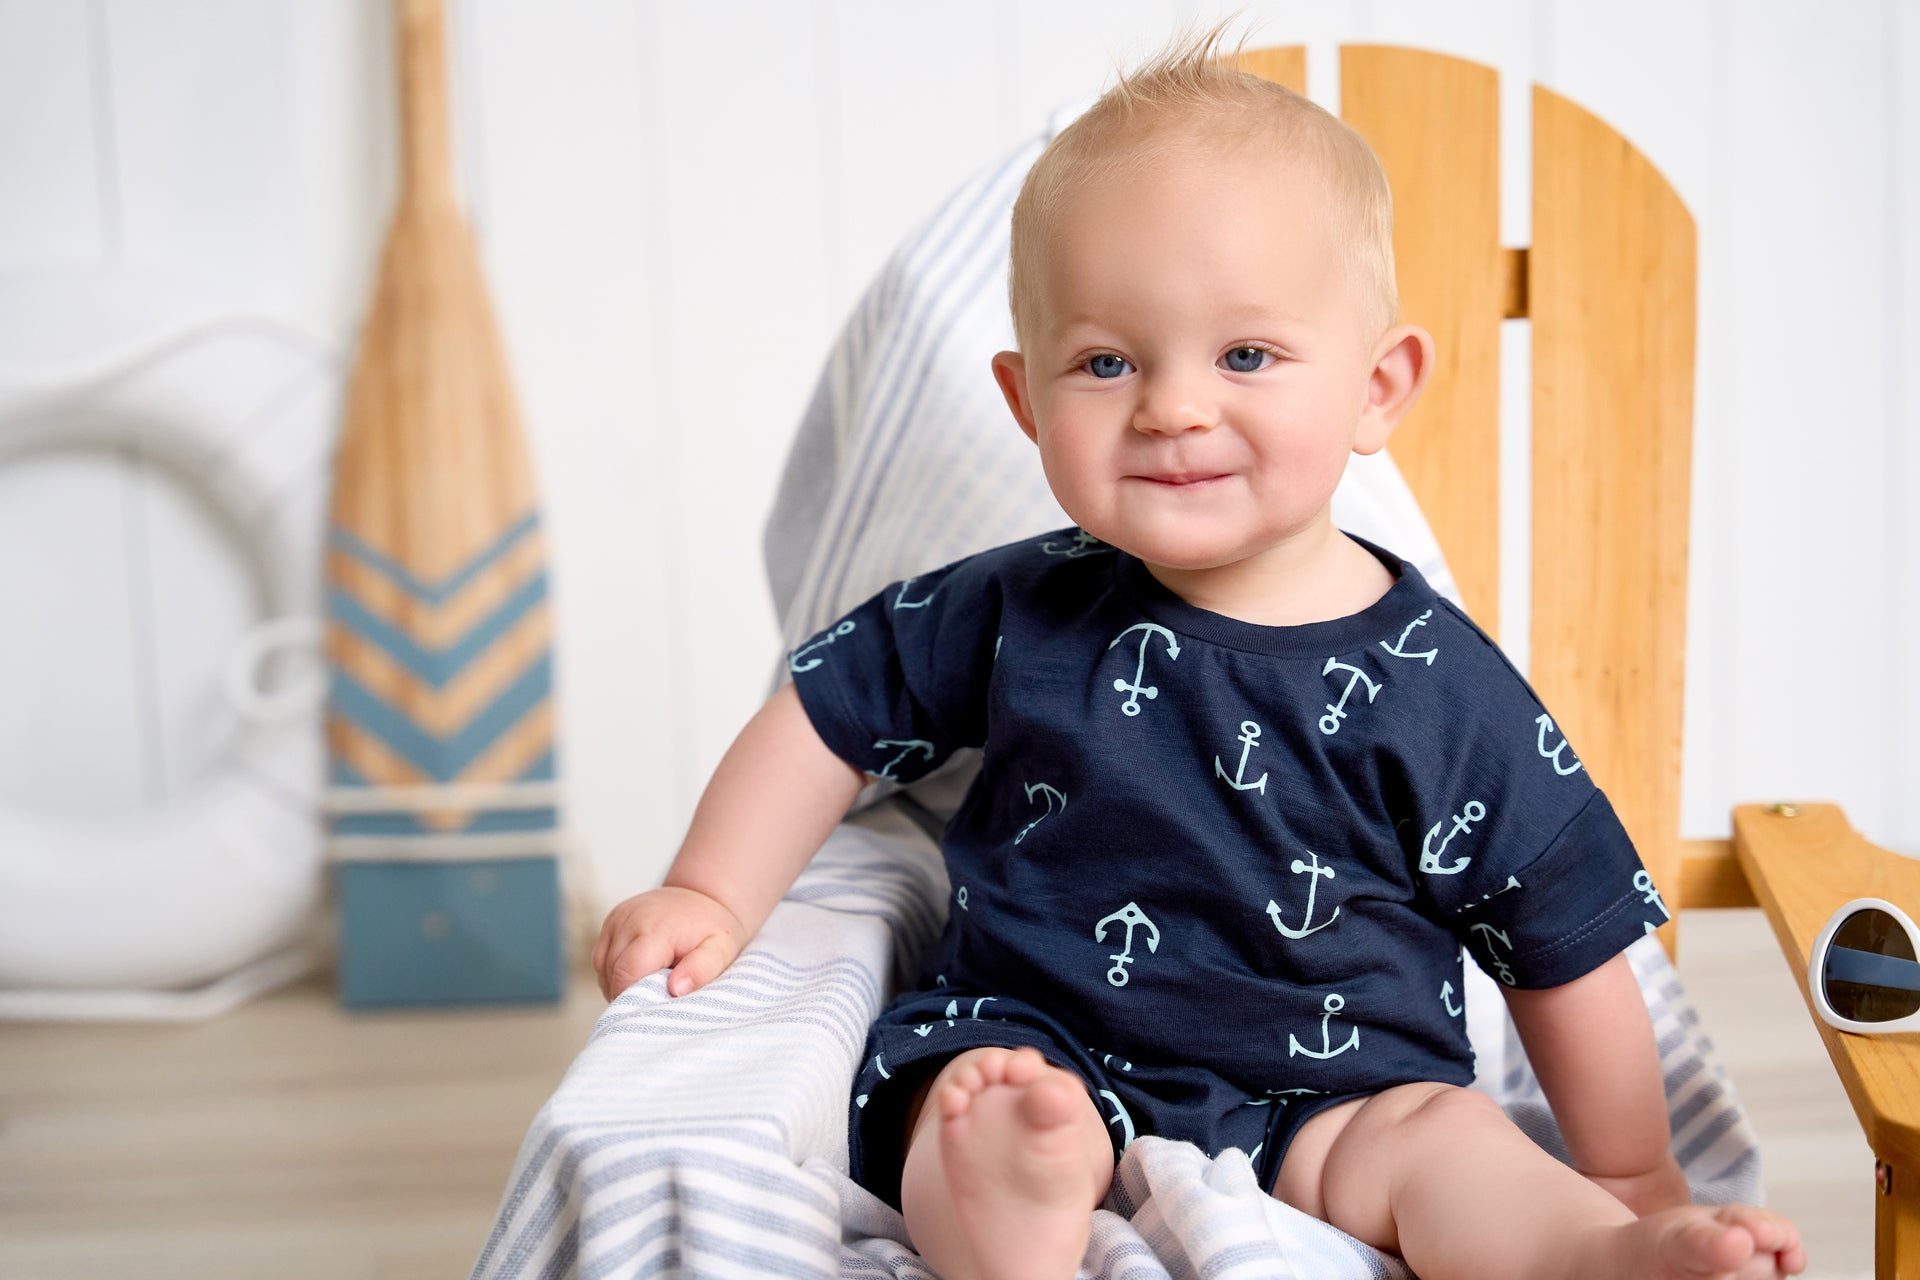 A baby boy sitting on a wooden chair, wearing a blue anchor-print shirt, smiling in a room with a striped cushion and a boat oar in the background.